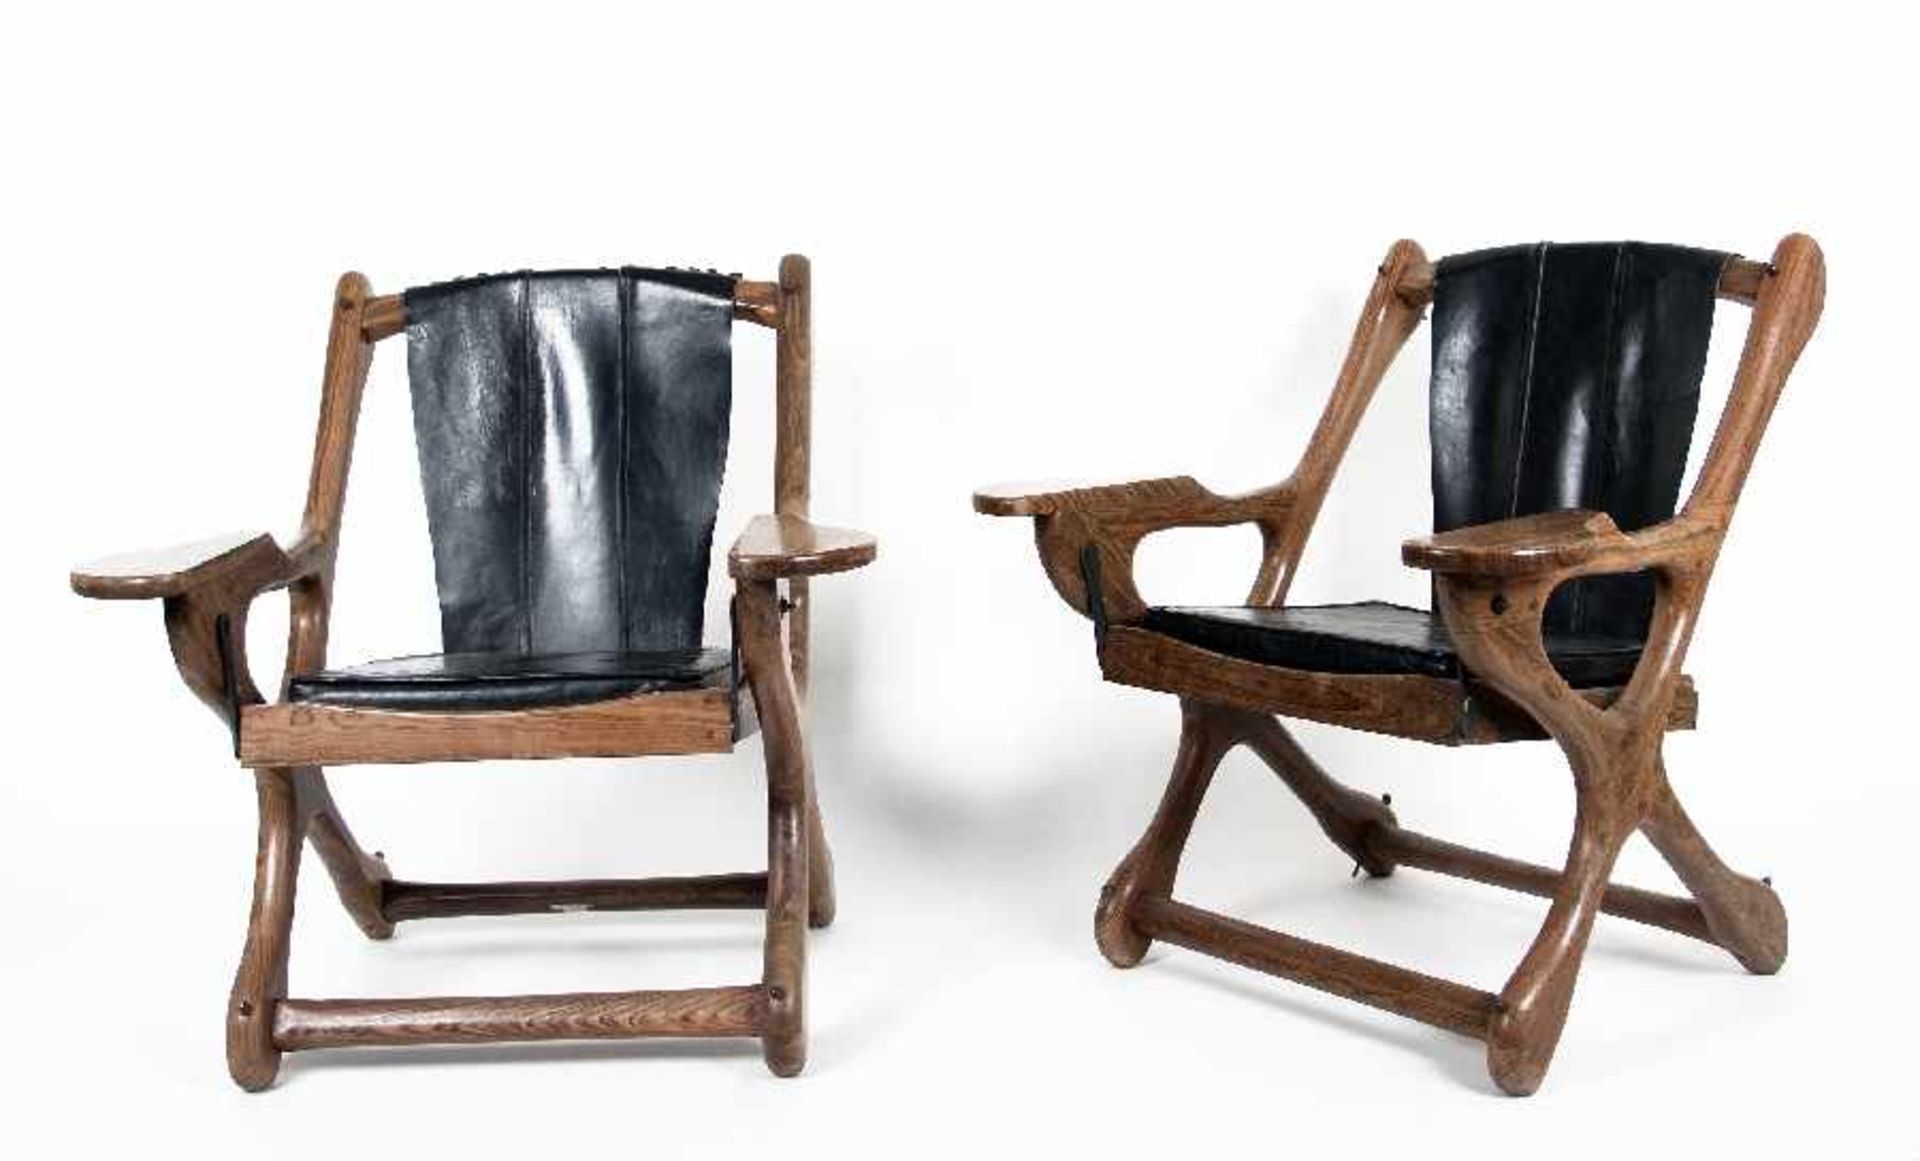 Don Shoemaker1920 - 1990A pair of Sling chairsLeather and tropical wood, 1960; H 88 cm, W 77 cm, D